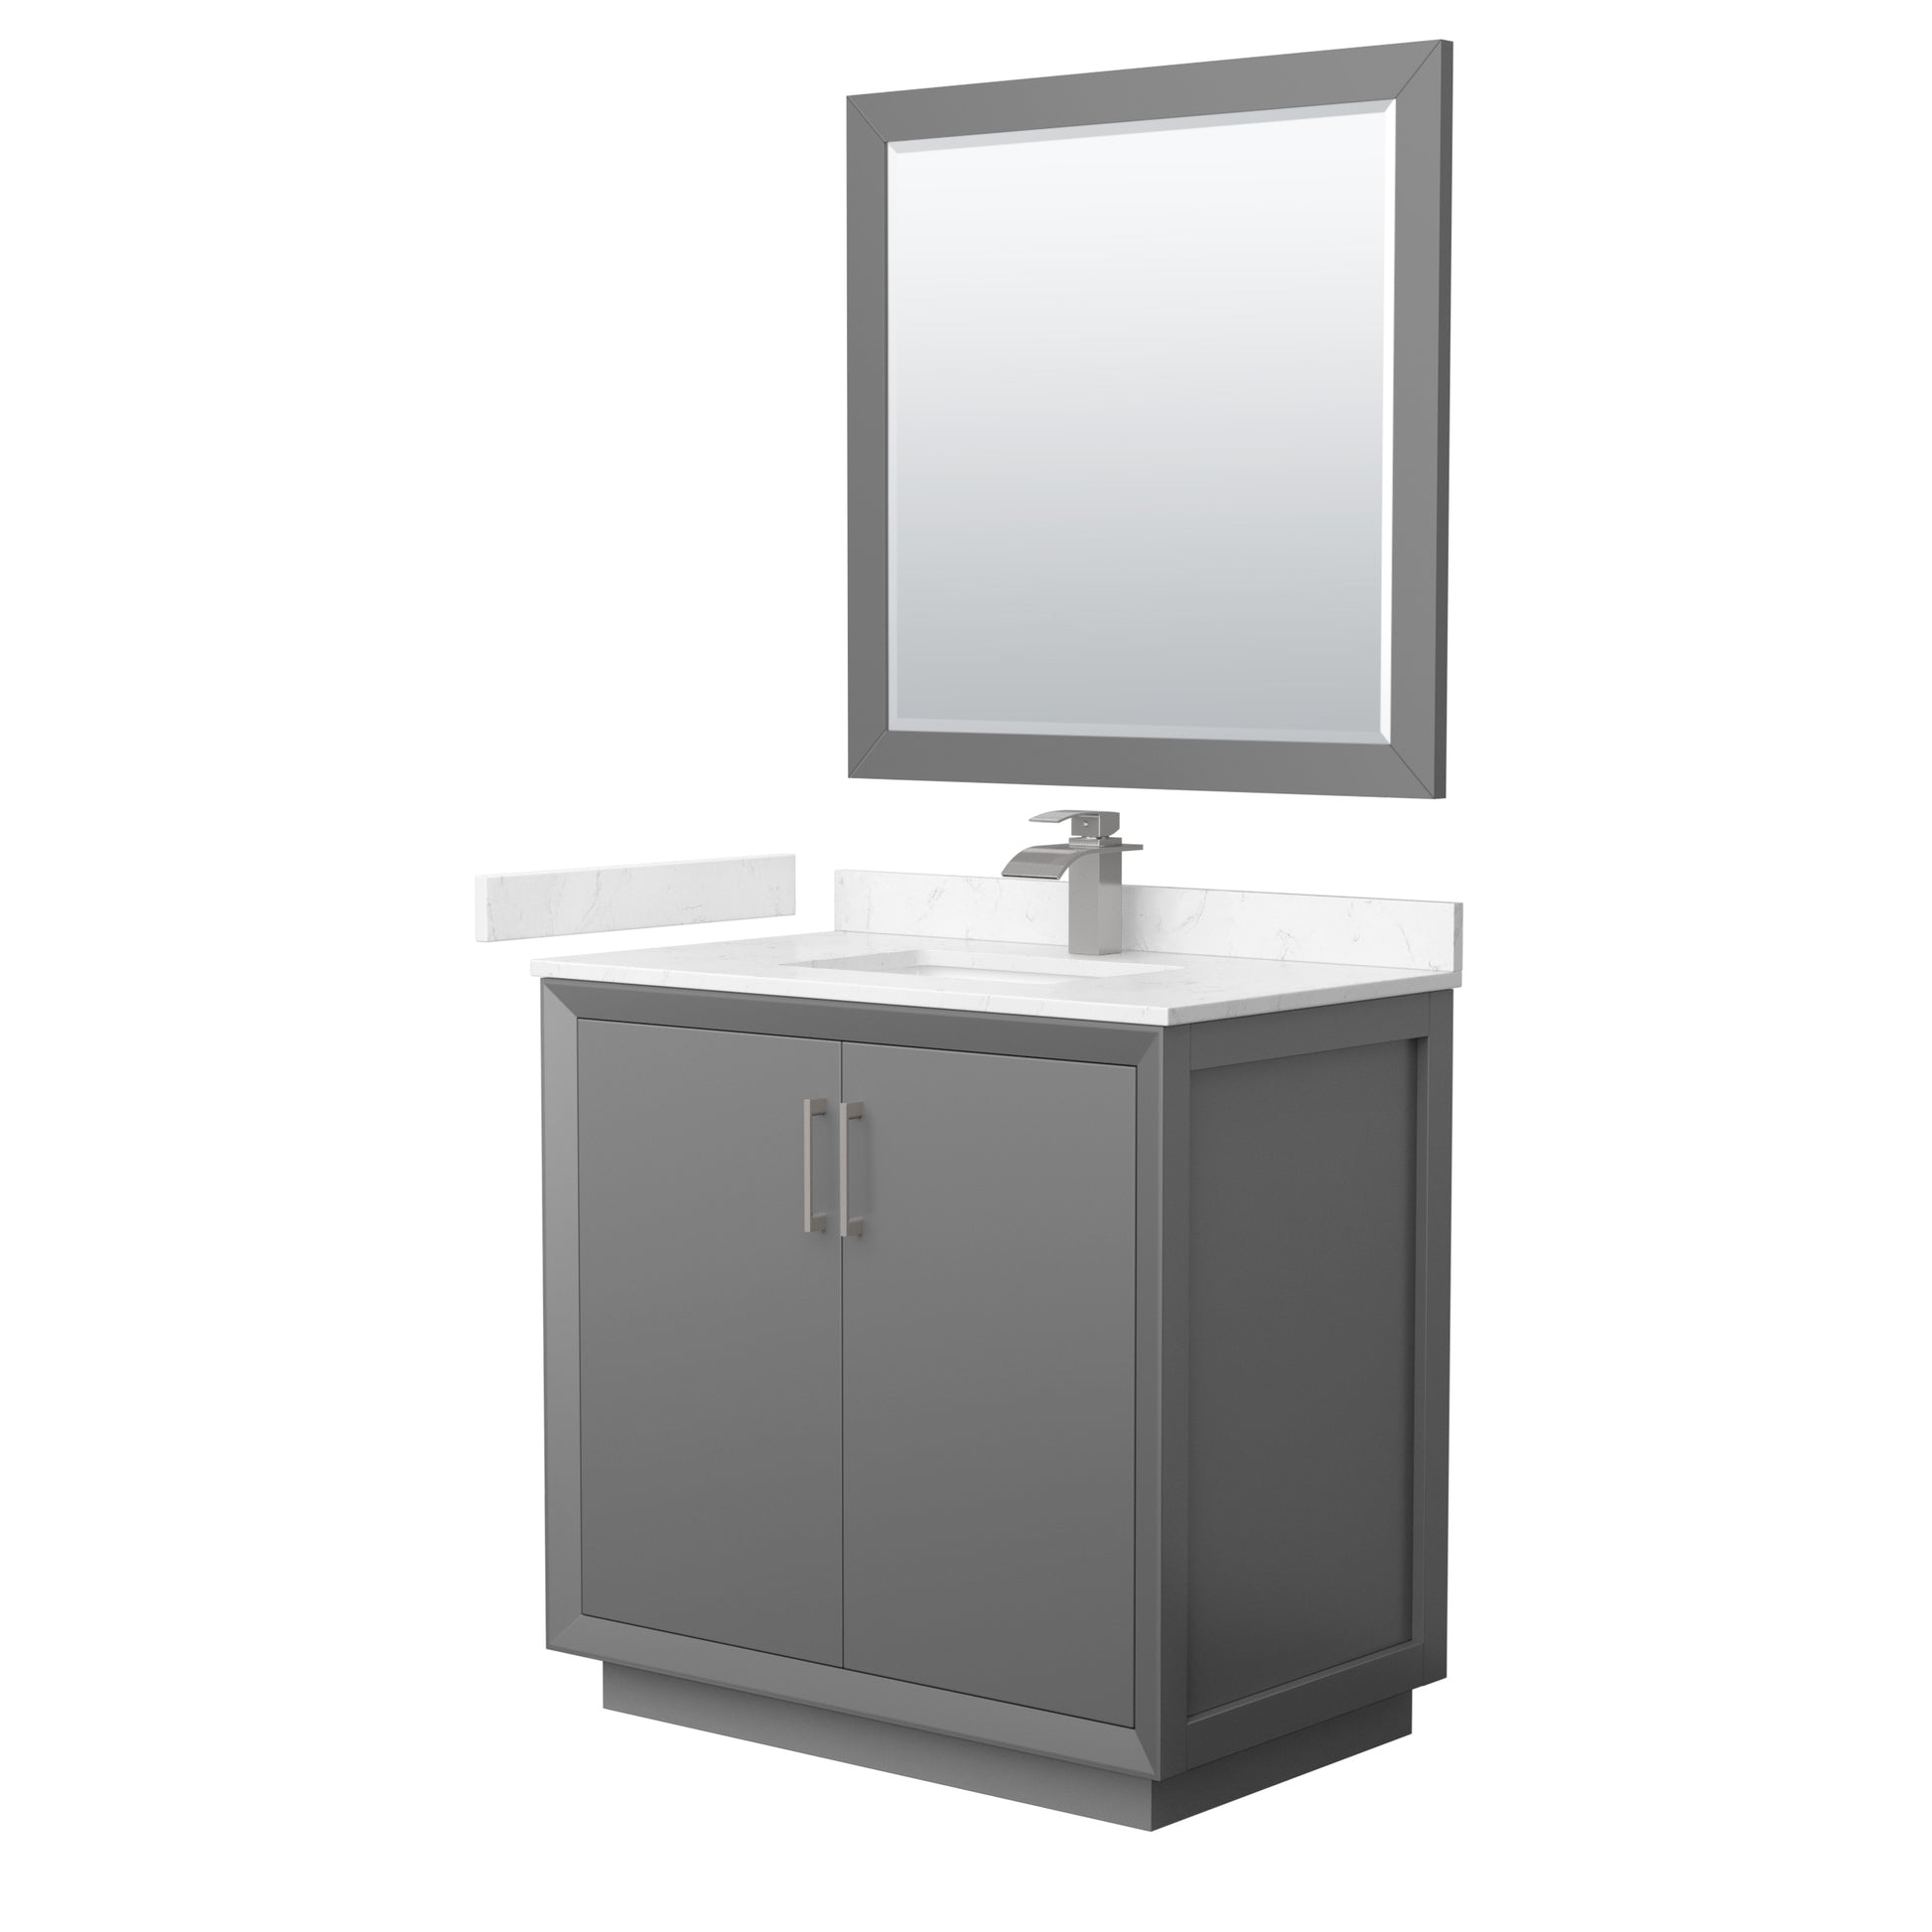 
  
  Strada Single Sink Vanity with Carrara Cultured Marble, Undermount Square Sink, Optional Trim and Mirror
  
